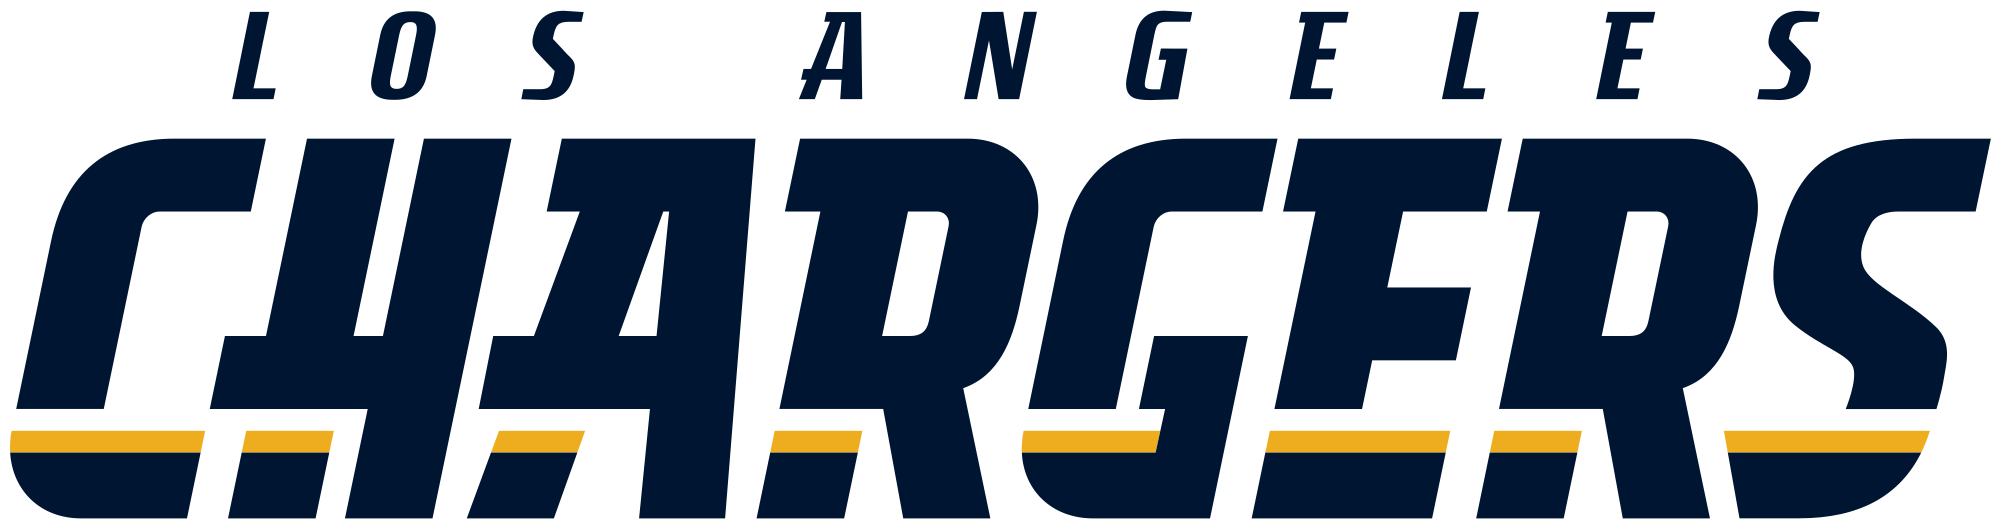 Los Angeles Chargers Logo - File:Los Angeles Chargers wordmark.svg - Wikimedia Commons